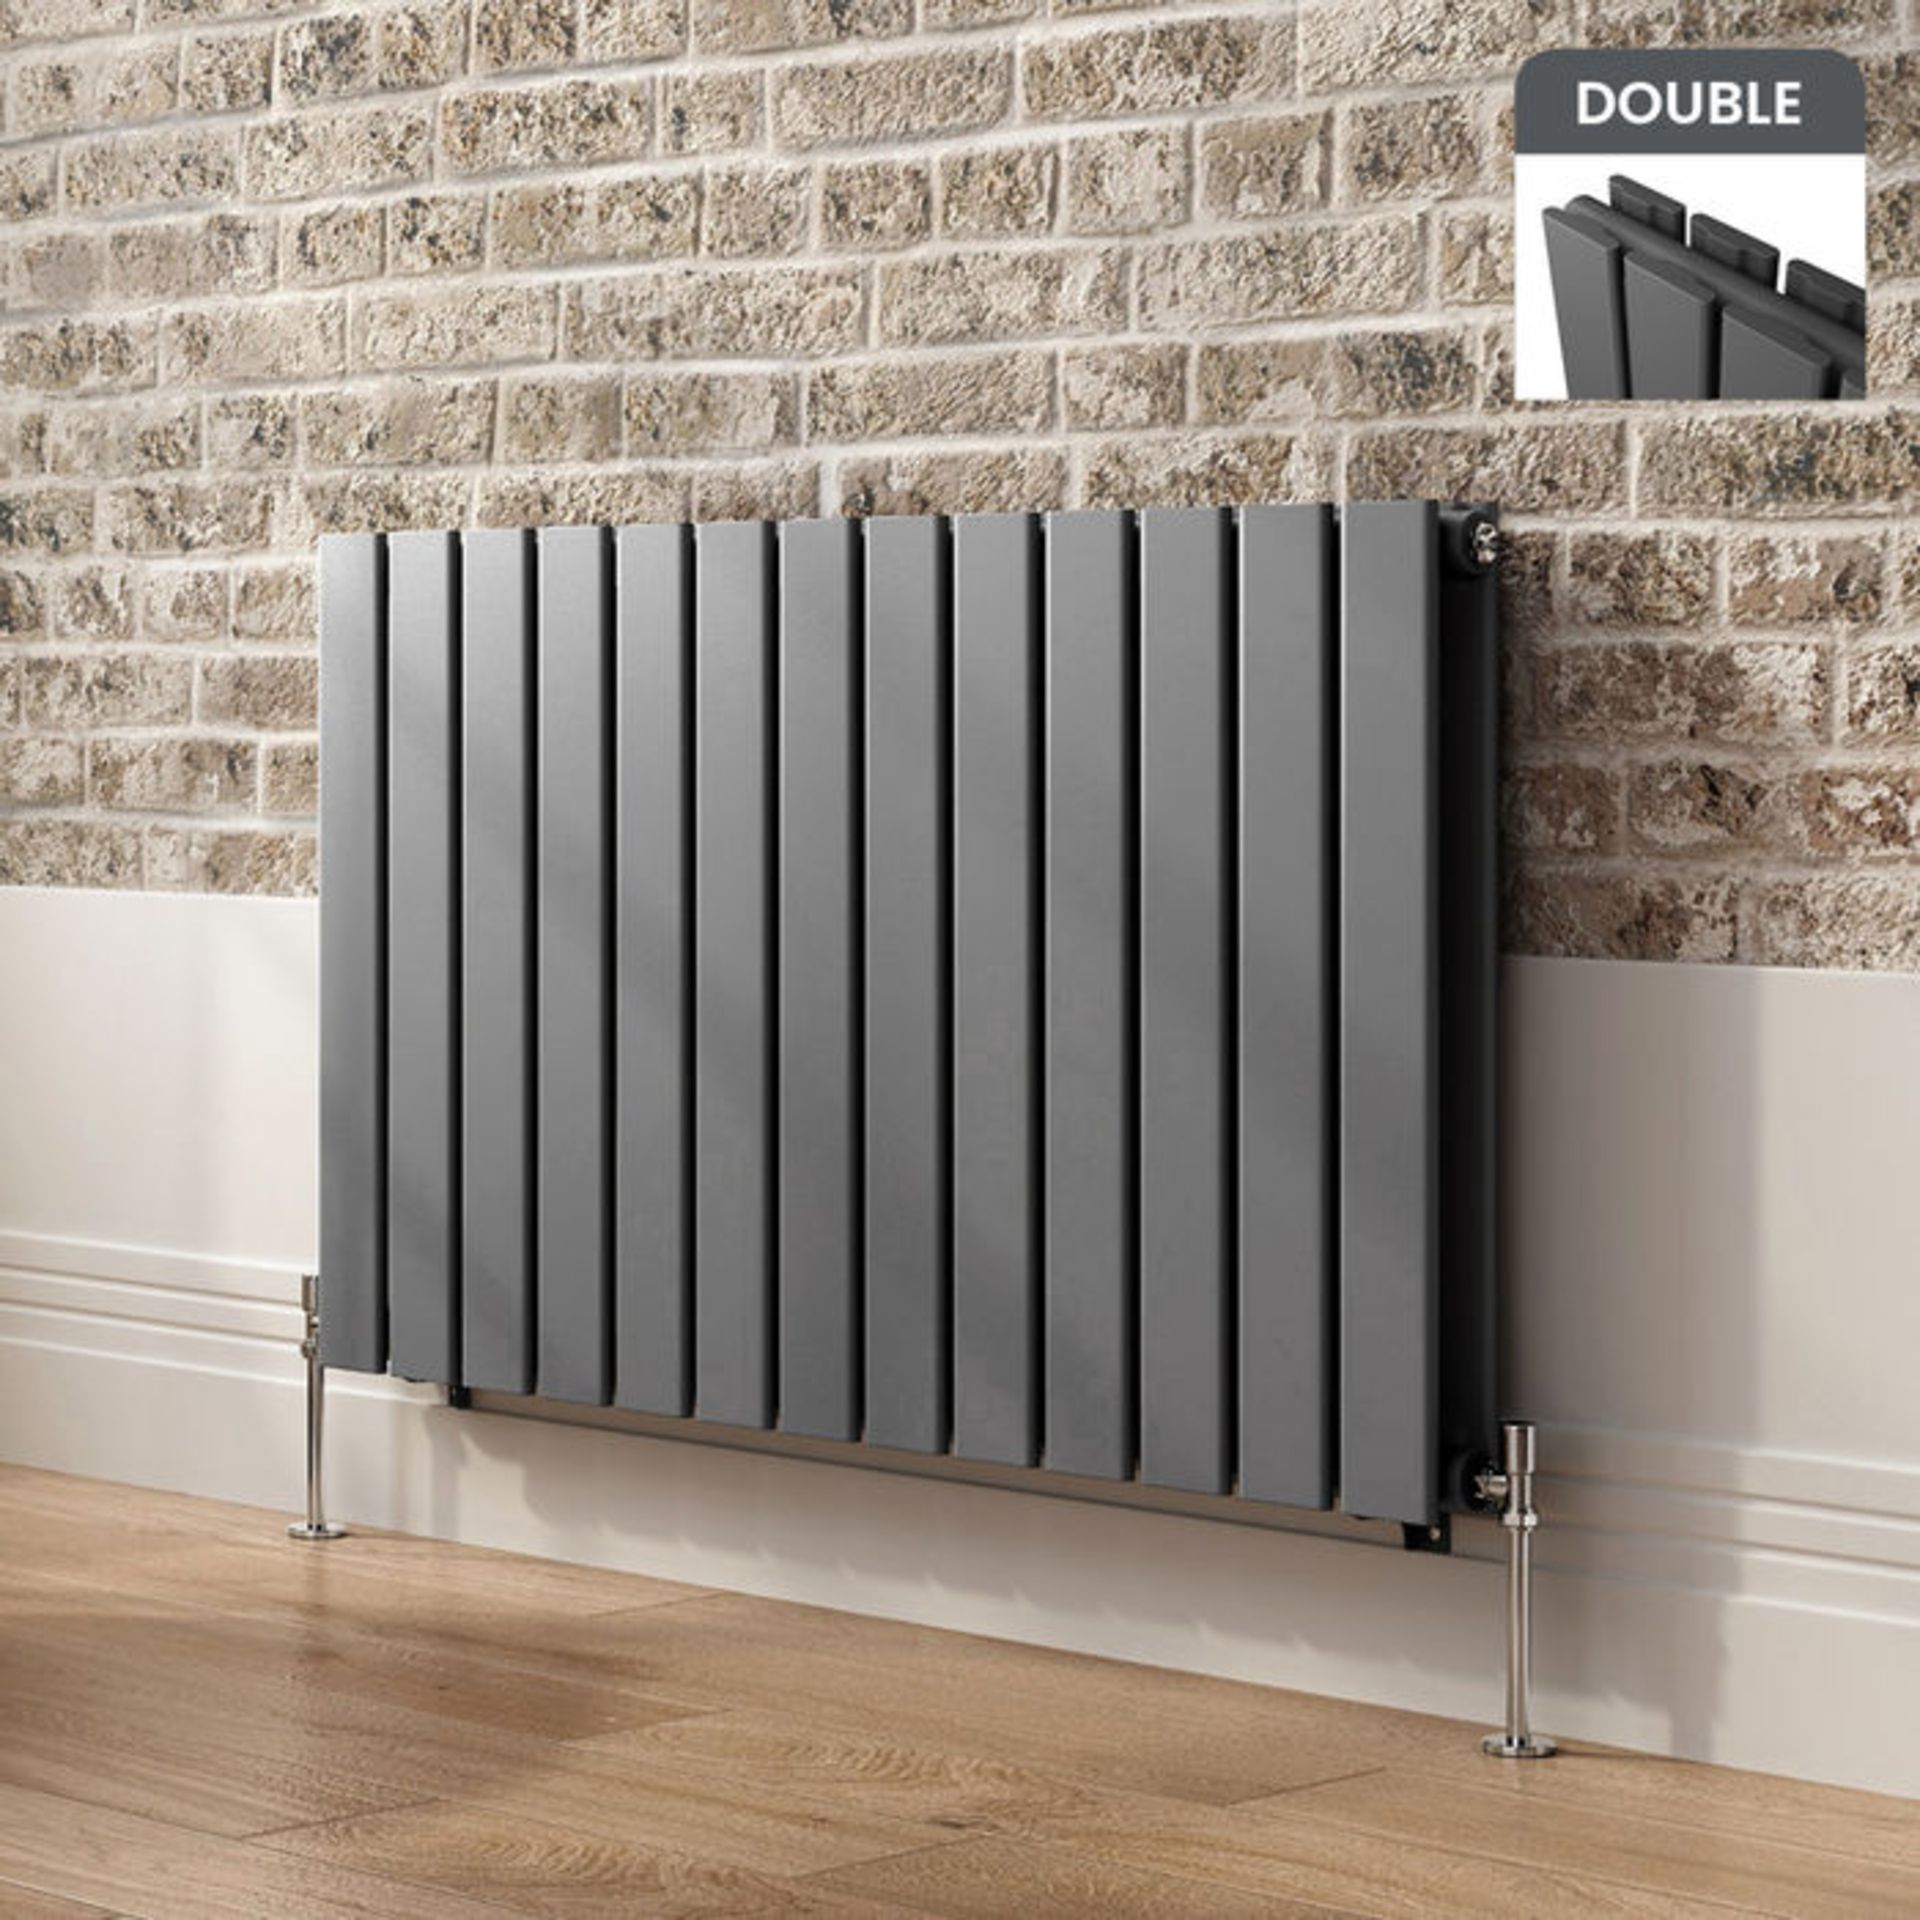 (PO79) 600x980mm Anthracite Double Flat Panel Horizontal Radiator RRP £319.99.Made with low carbon